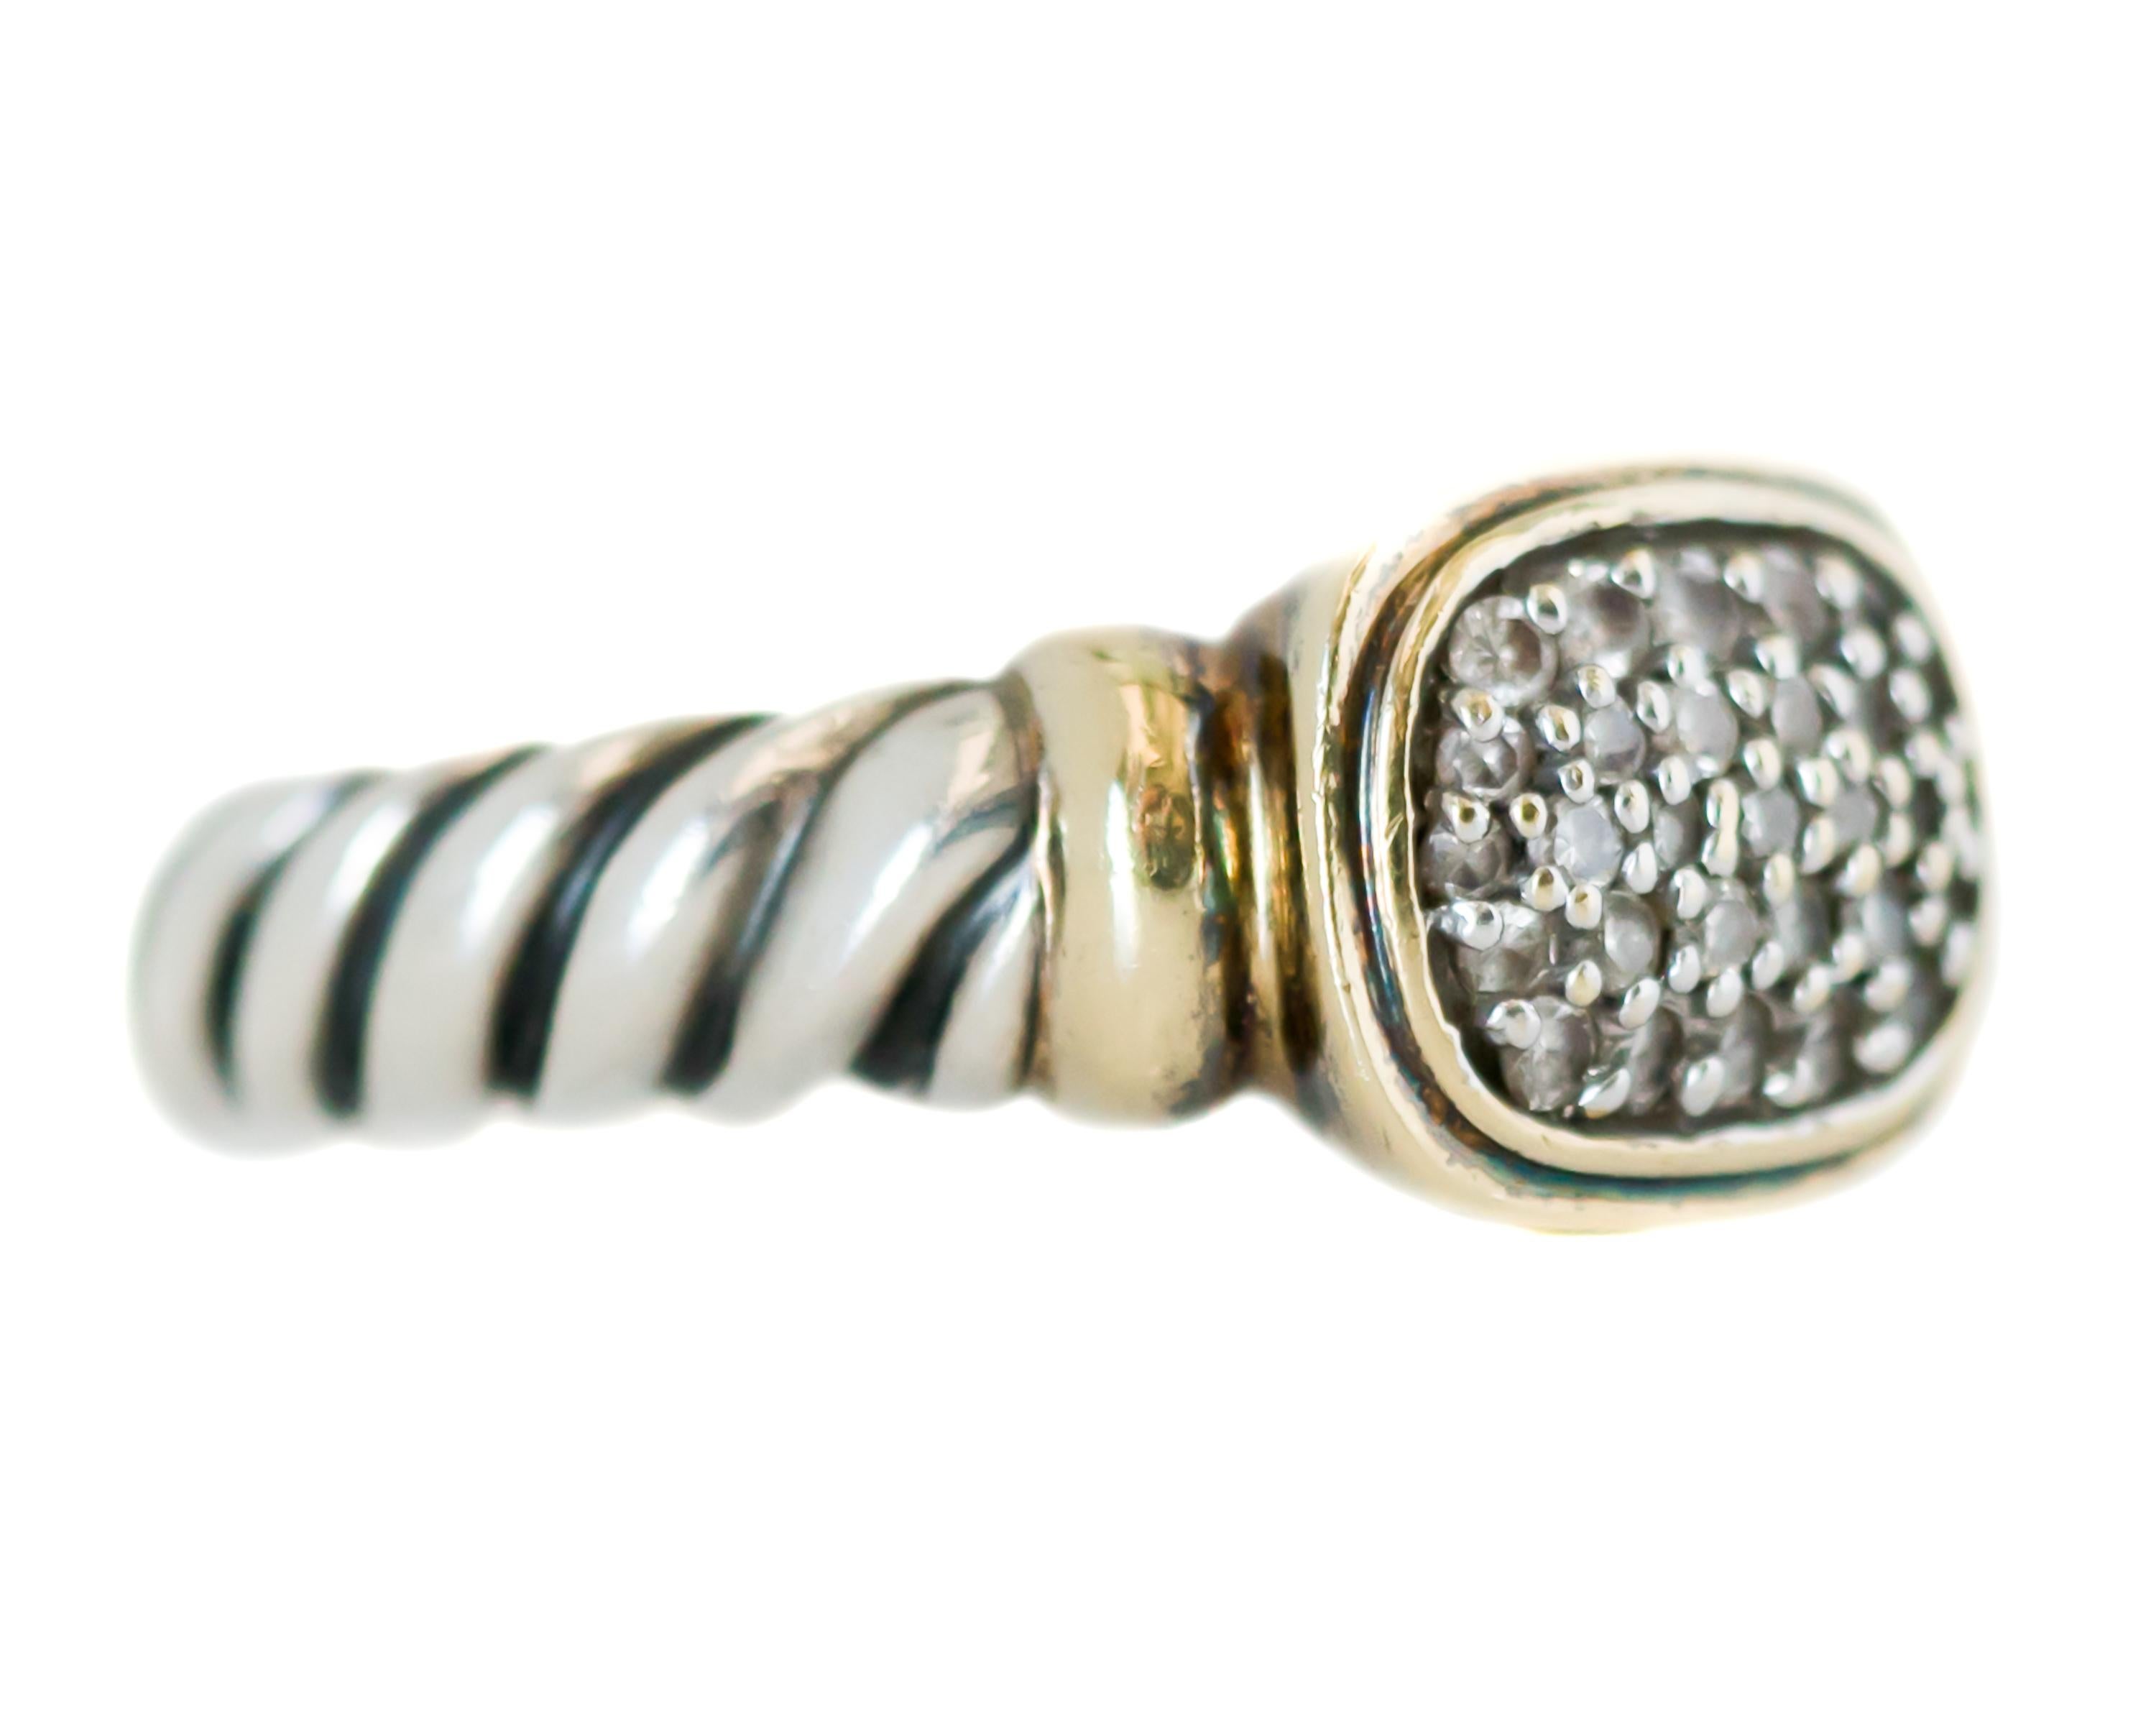 1990s David Yurman Diamond Cable Ring - 18 Karat Yellow Gold, Sterling Silver, Diamonds

Features:
Pave Diamond Ring Face
18 Karat Yellow Gold Frame and Shoulders
Sterling Silver Cable Shank and Back

Ring fits a size 7 3/4 and can be resized
Finger